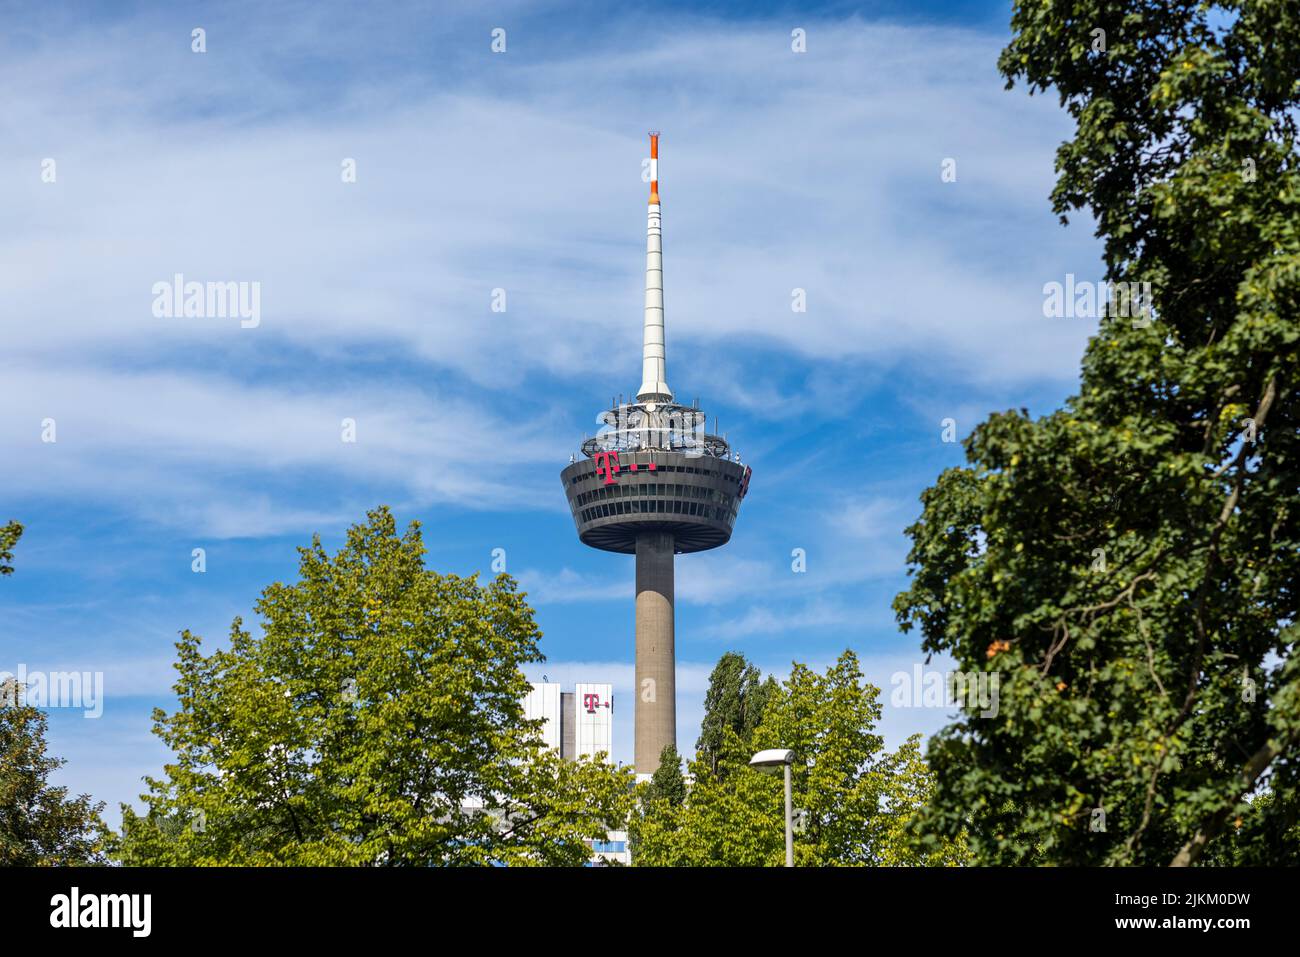 Tall communication tower rising high above Cologne urban skyline Stock Photo